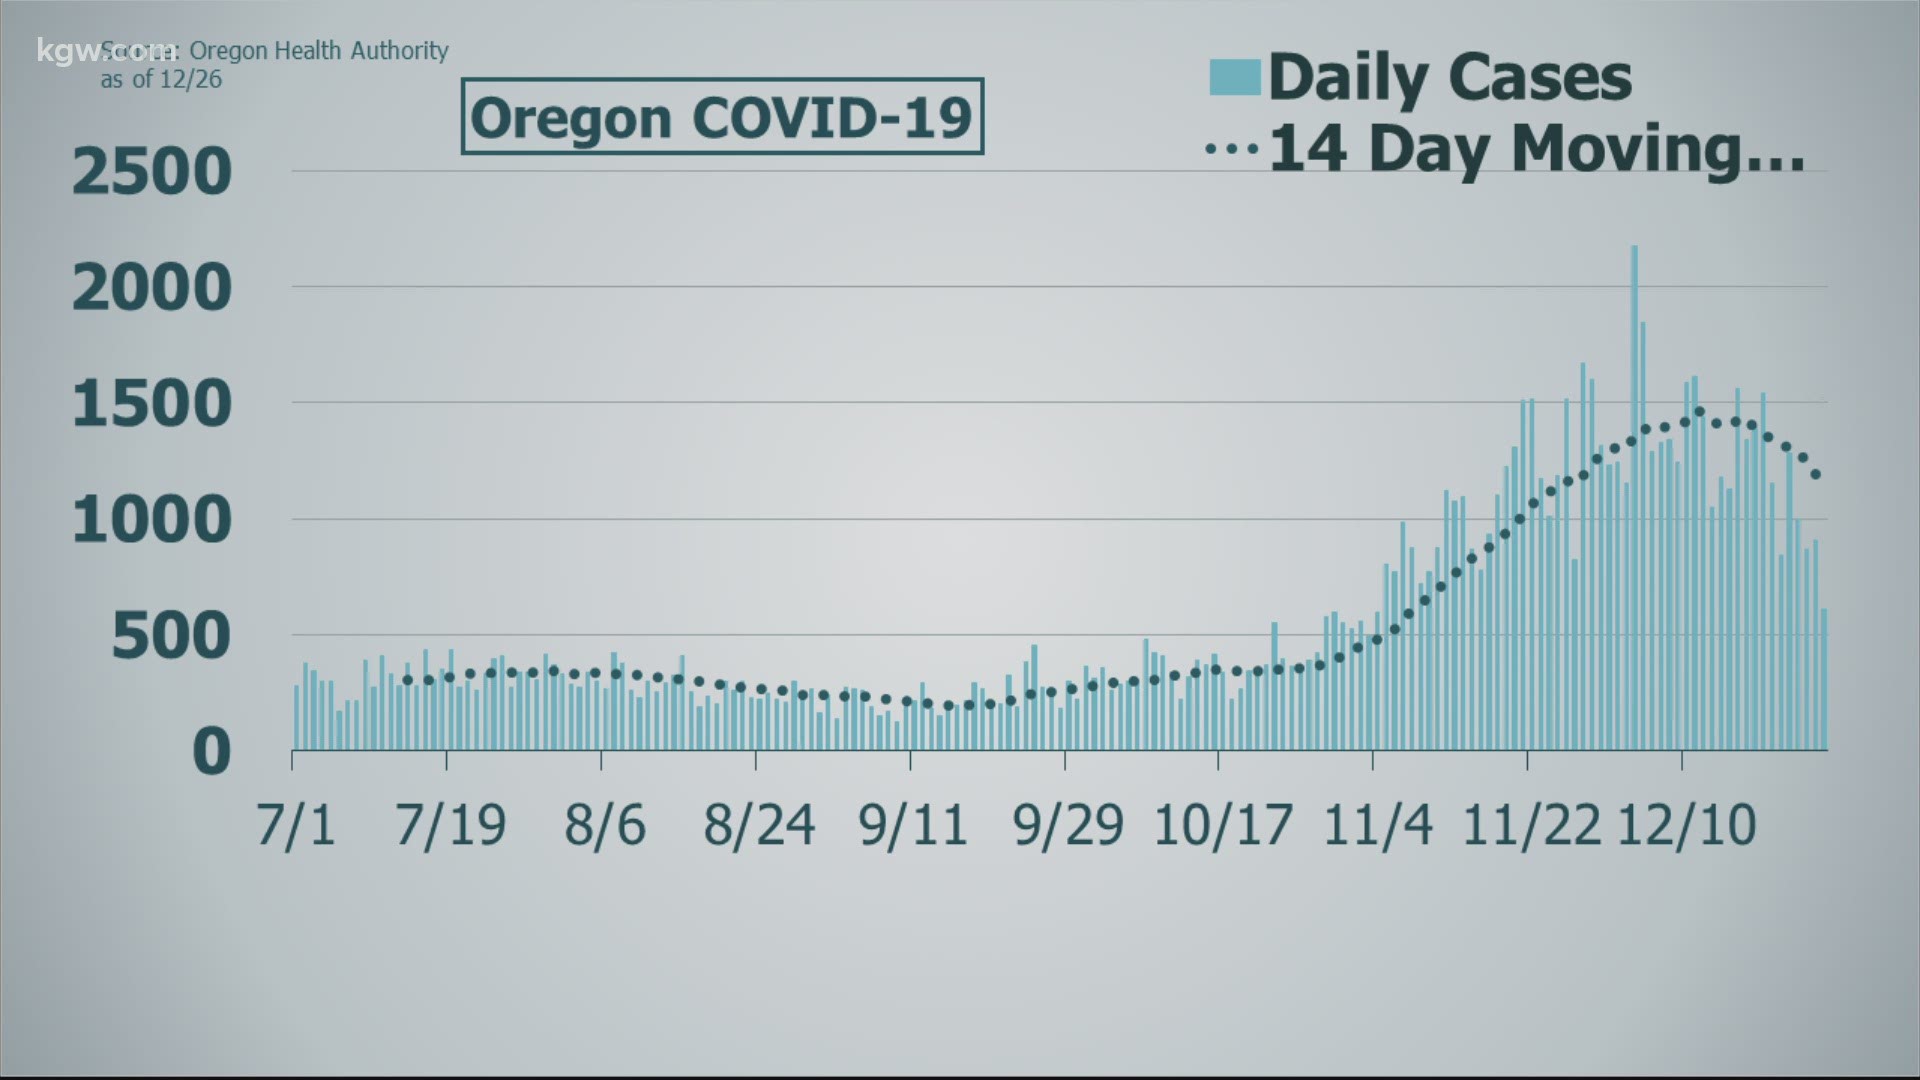 The Oregon Health Authority reported no new COVID-19 deaths in its daily report on Saturday.